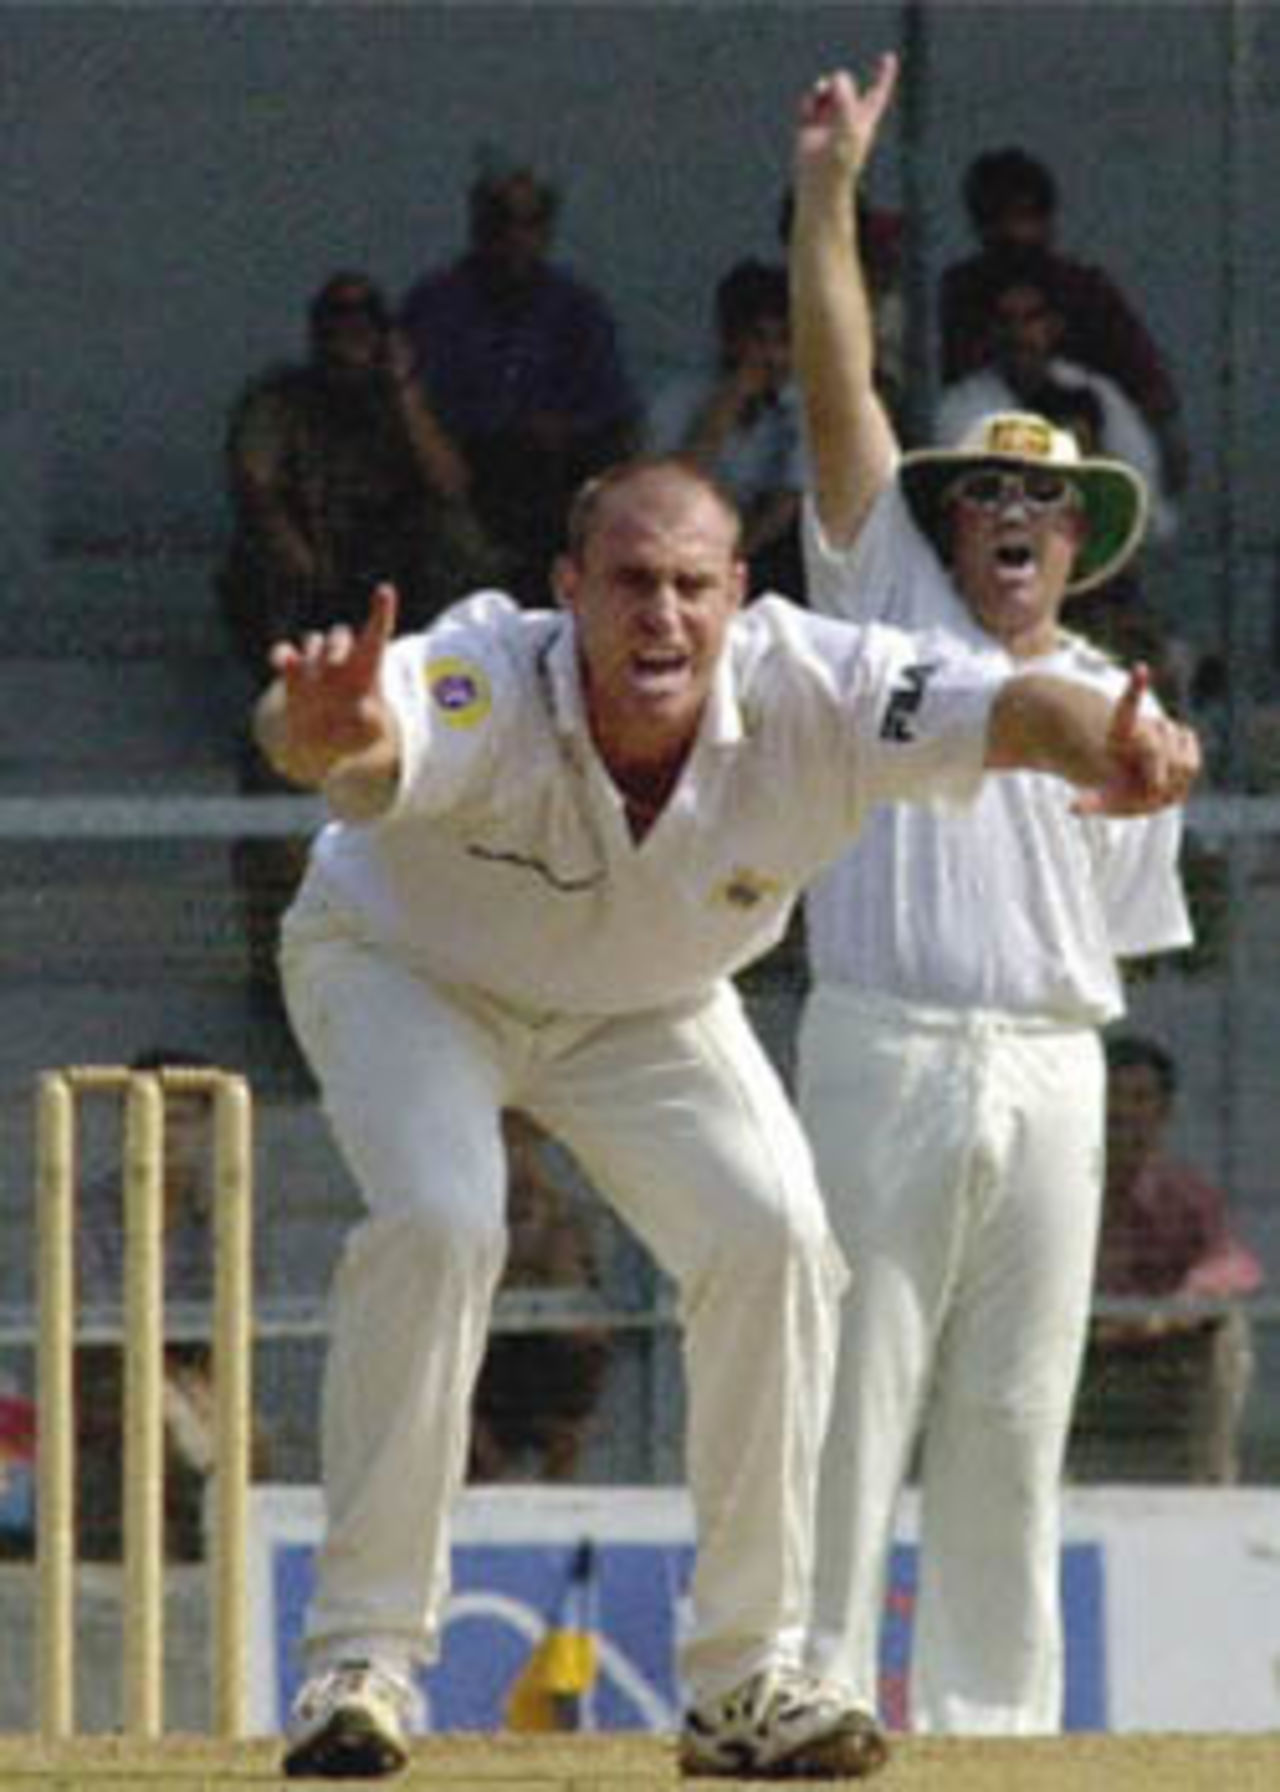 Australian cricketer Mathew Hayden (L) and teammate Shane Warne appeal for an LBW at Bombay's Vinayak Mane, 22 February 2001, during a three-day warm-up match prior to their three-Test series against India. McGrath raised the stakes for the upcoming series against India, saying 22 February that Indian player Sachin Tendulkar feigned injury to avoid an early confrontation with him.